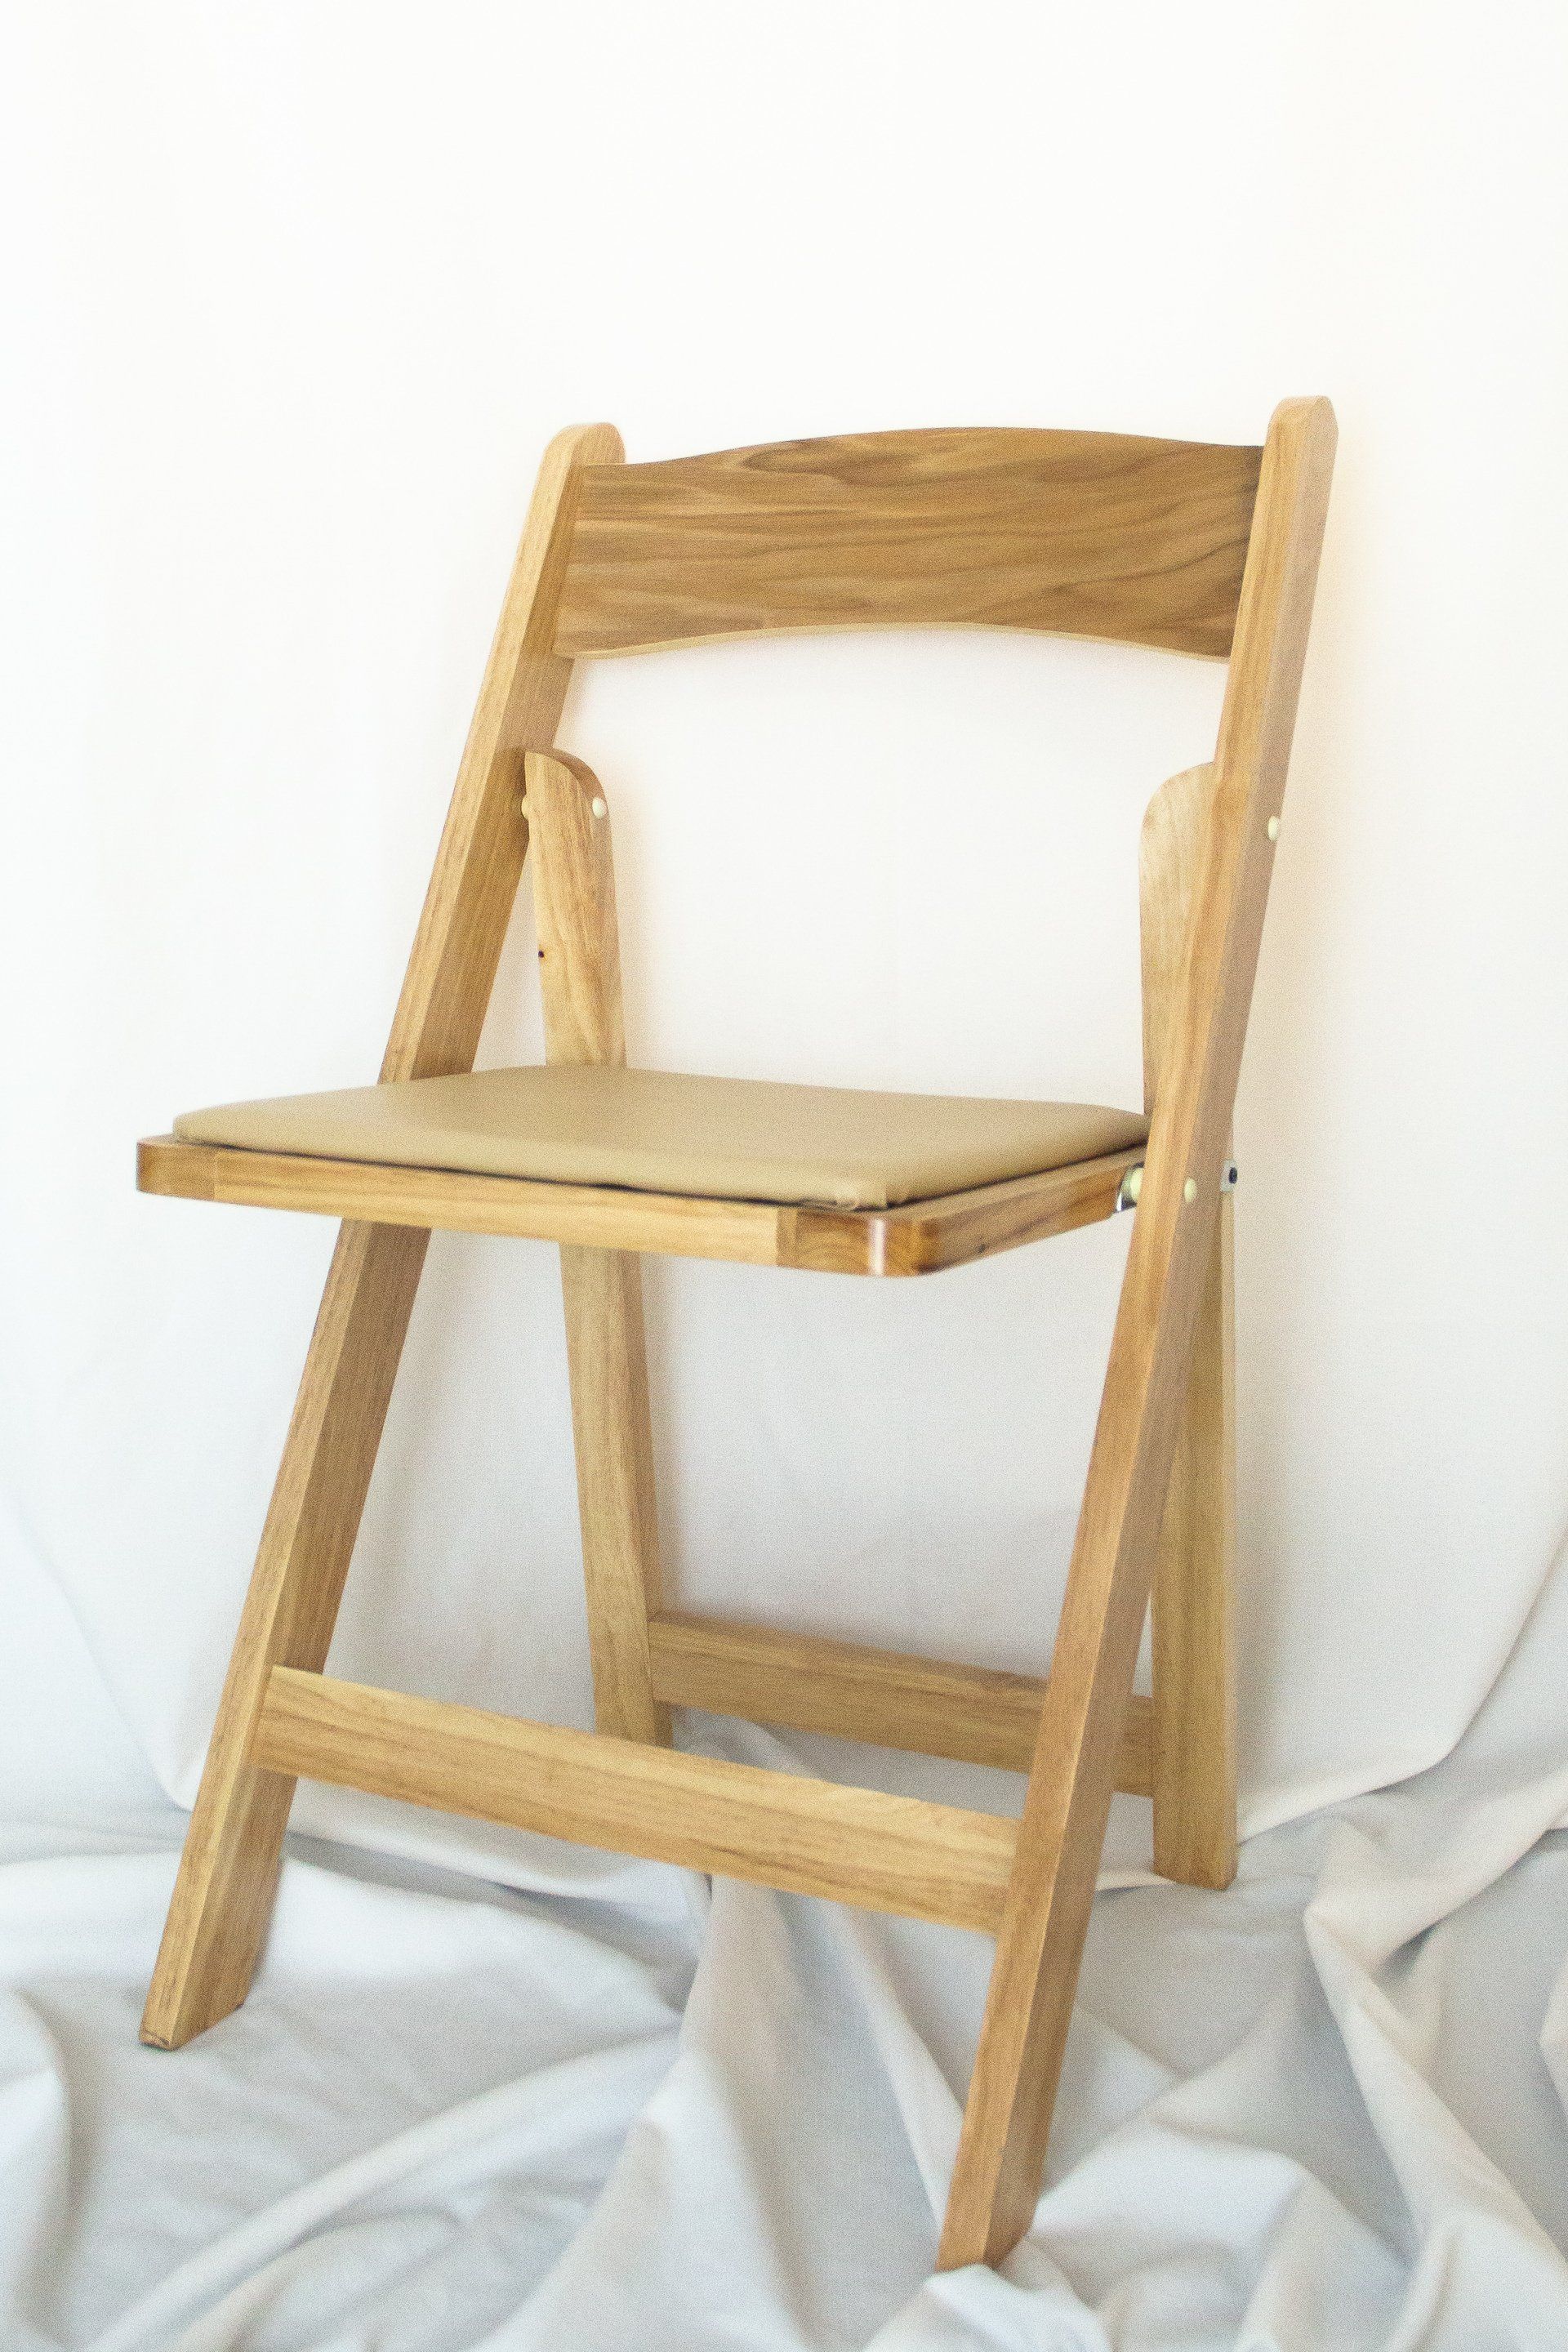 A wooden folding chair is sitting on a white cloth